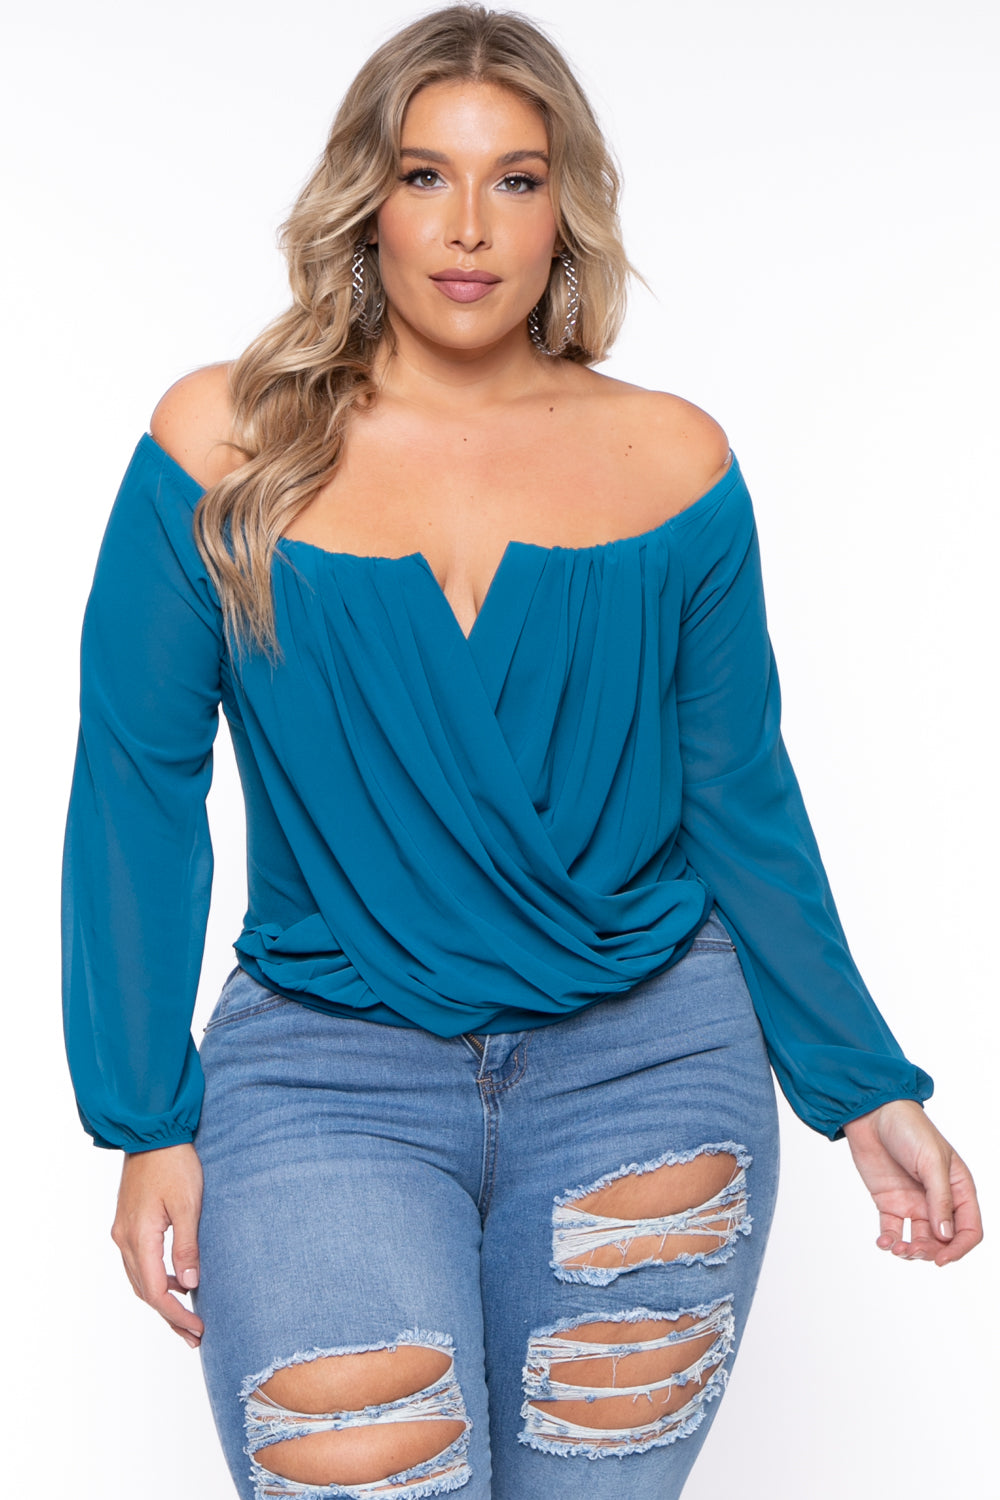 Bluebell Tops 1X / Teal Plus Size Aryana Cross Over Top - Teal